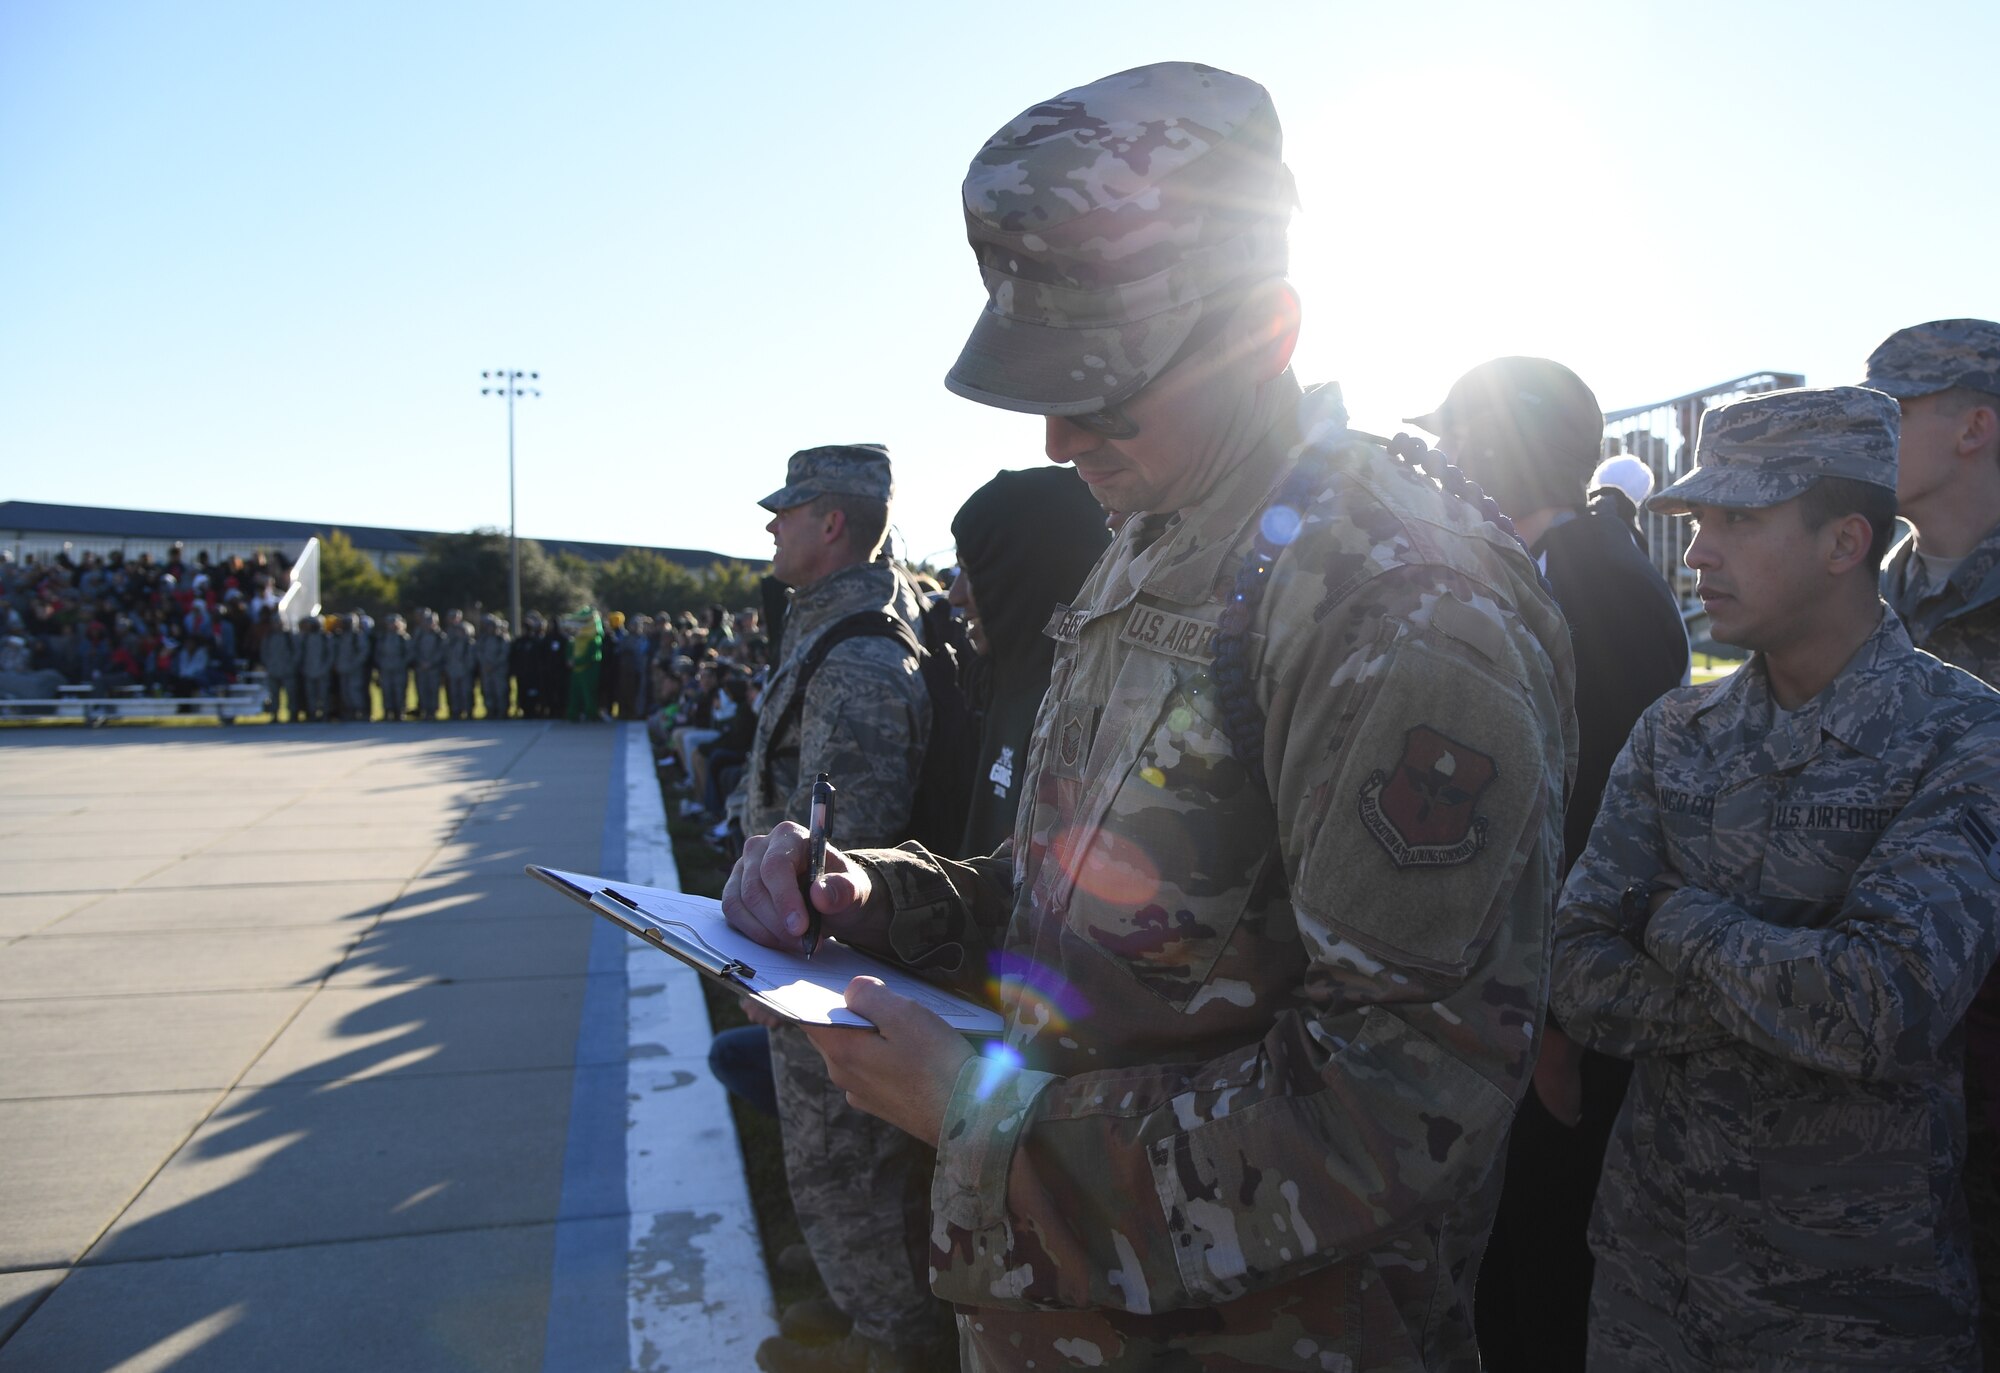 U.S. Air Force Master Sgt. David Gustafson, 334th Training Squadron flight chief, judges a performance during the 81st Training Group drill down on the Levitow Training Support Facility drill pad at Keesler Air Force Base, Mississippi, Nov. 1, 2019. Airmen from the 81st TRG competed in a quarterly open ranks inspection, regulation drill routine and freestyle drill routine. Keesler trains more than 30,000 students each year. While in training, Airmen are given the opportunity to volunteer to learn and execute drill down routines. (U.S. Air Force photo by Kemberly Groue)